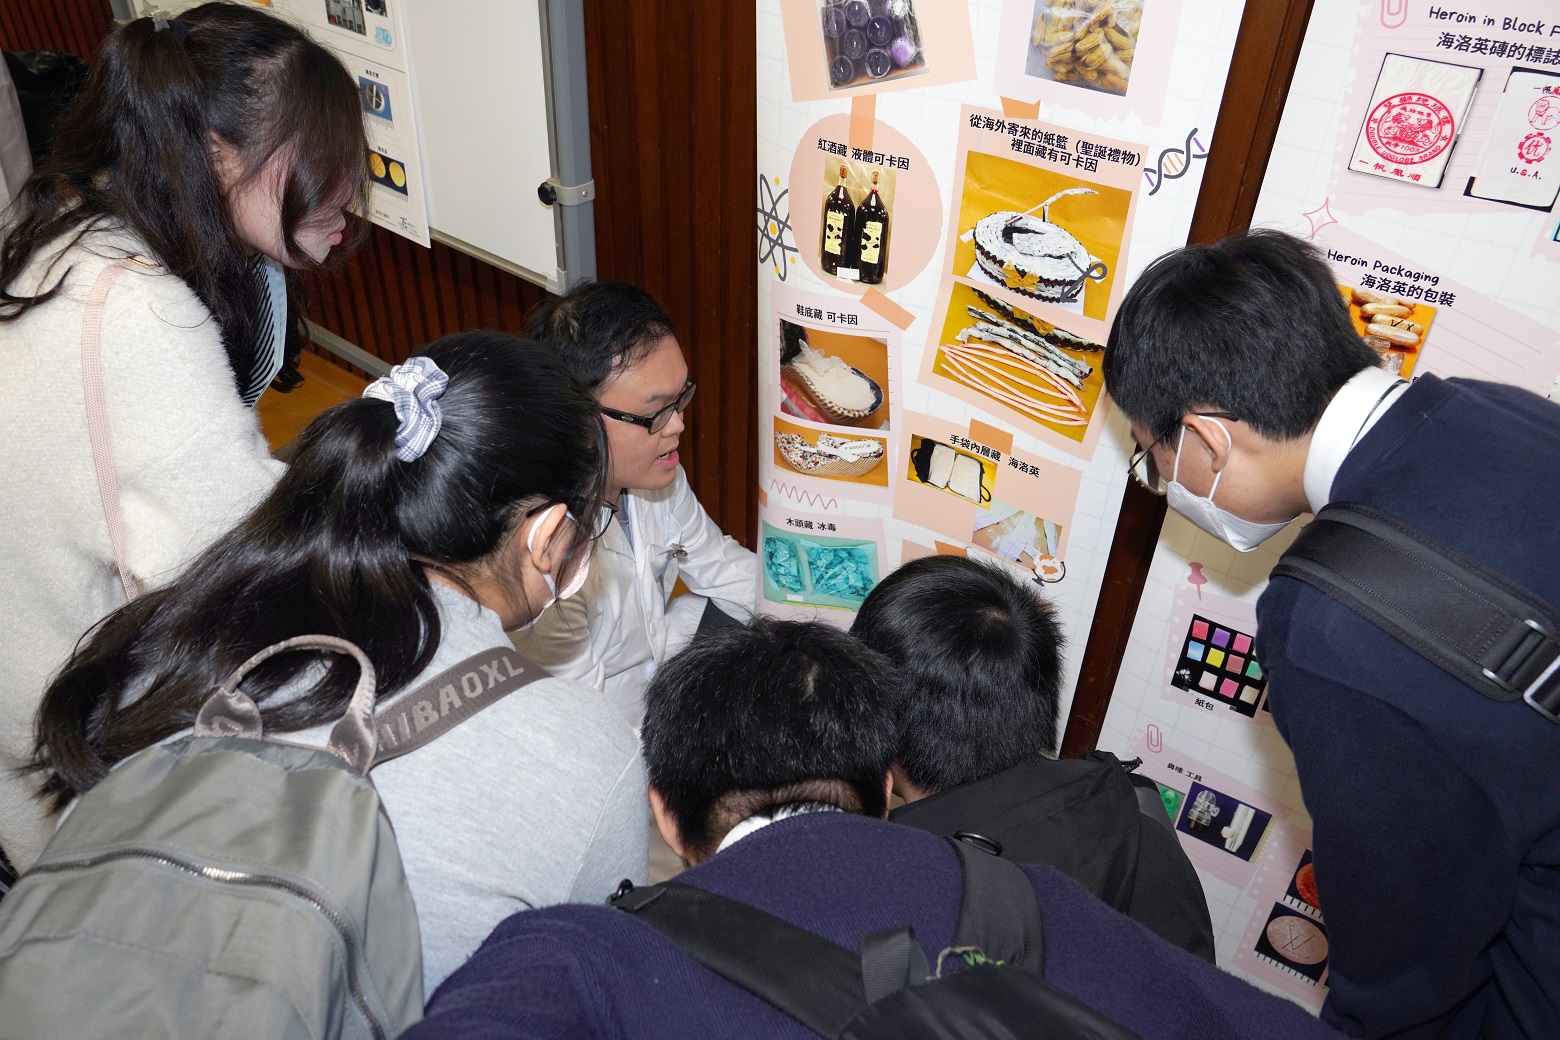 Government Laboratory (GL)’s colleague illustrating the work of GL to the students.